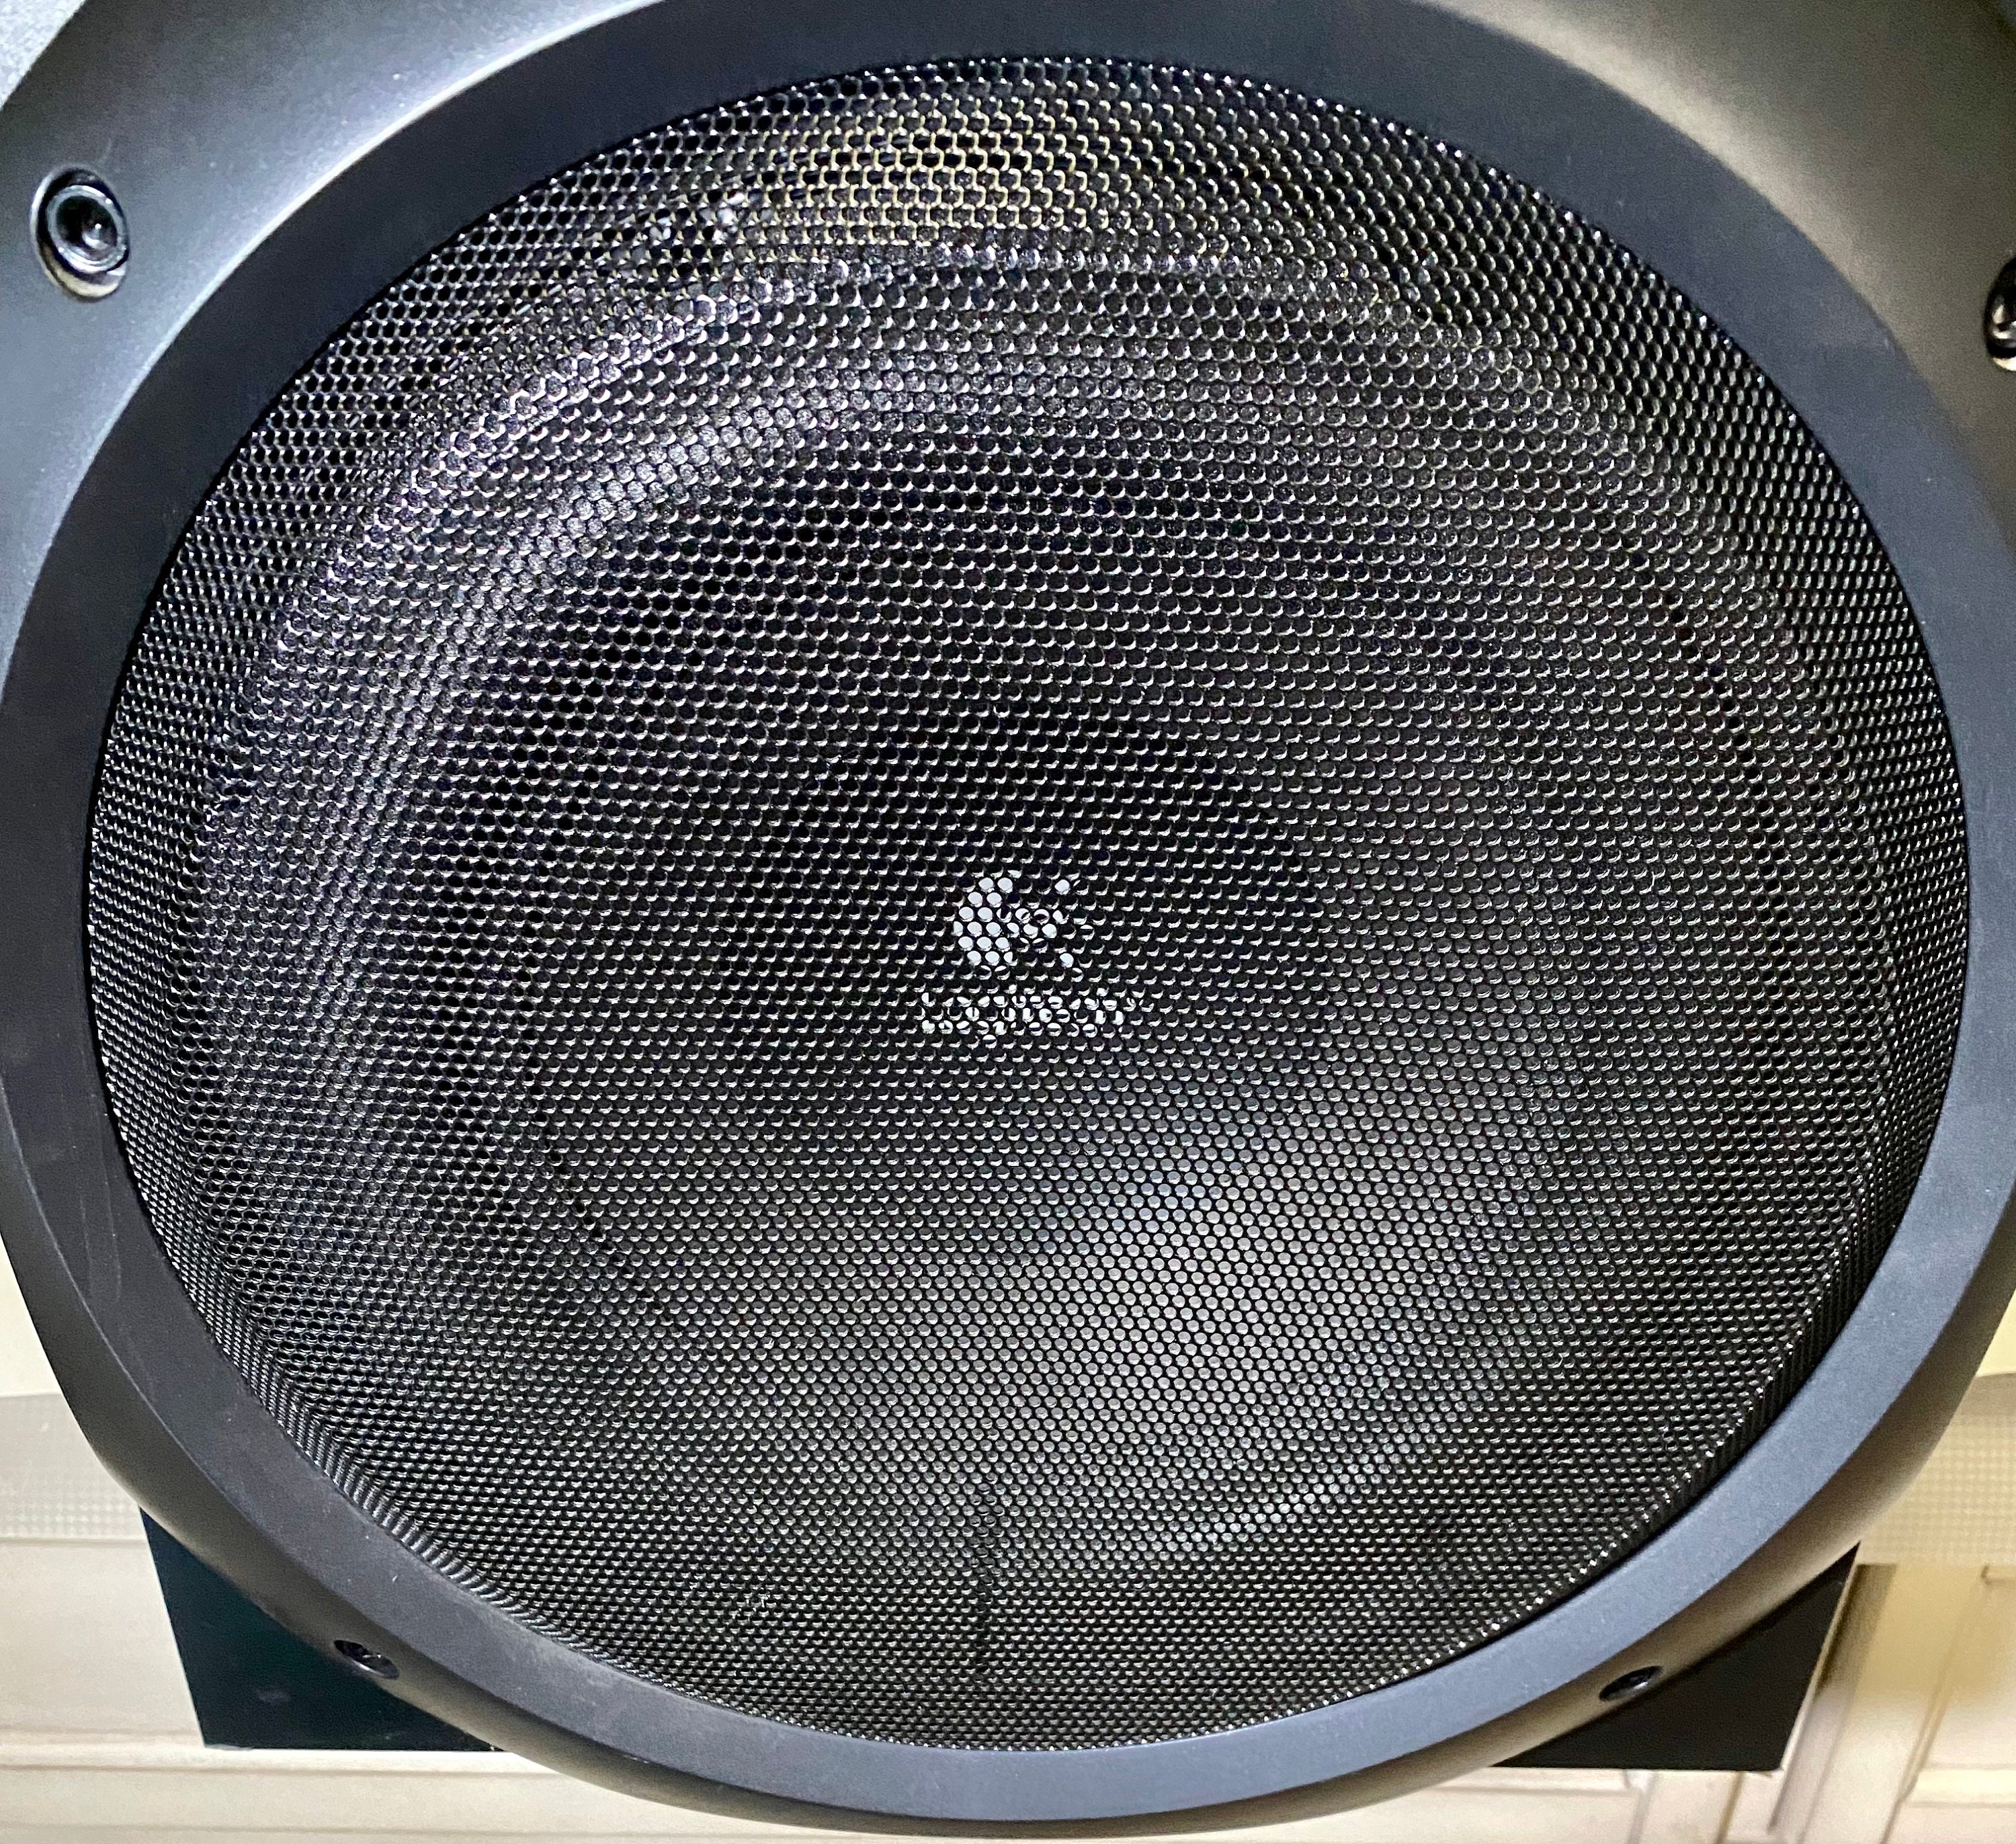 Logitech Powered Active Subwoofer Tested -